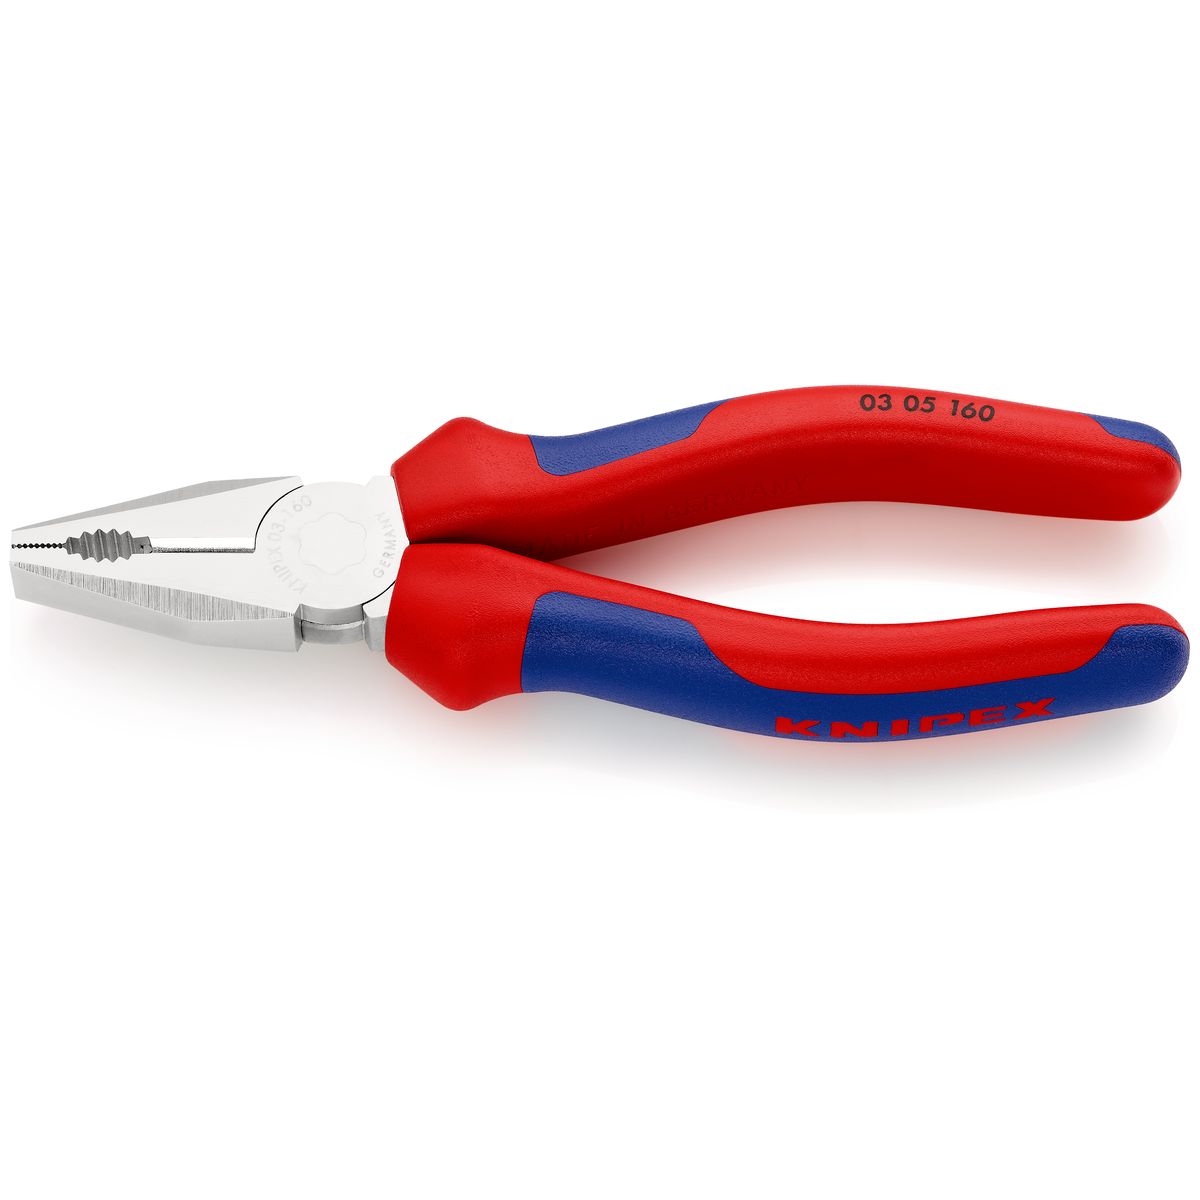 COMBINATION PLIERS 0305160 Knipex